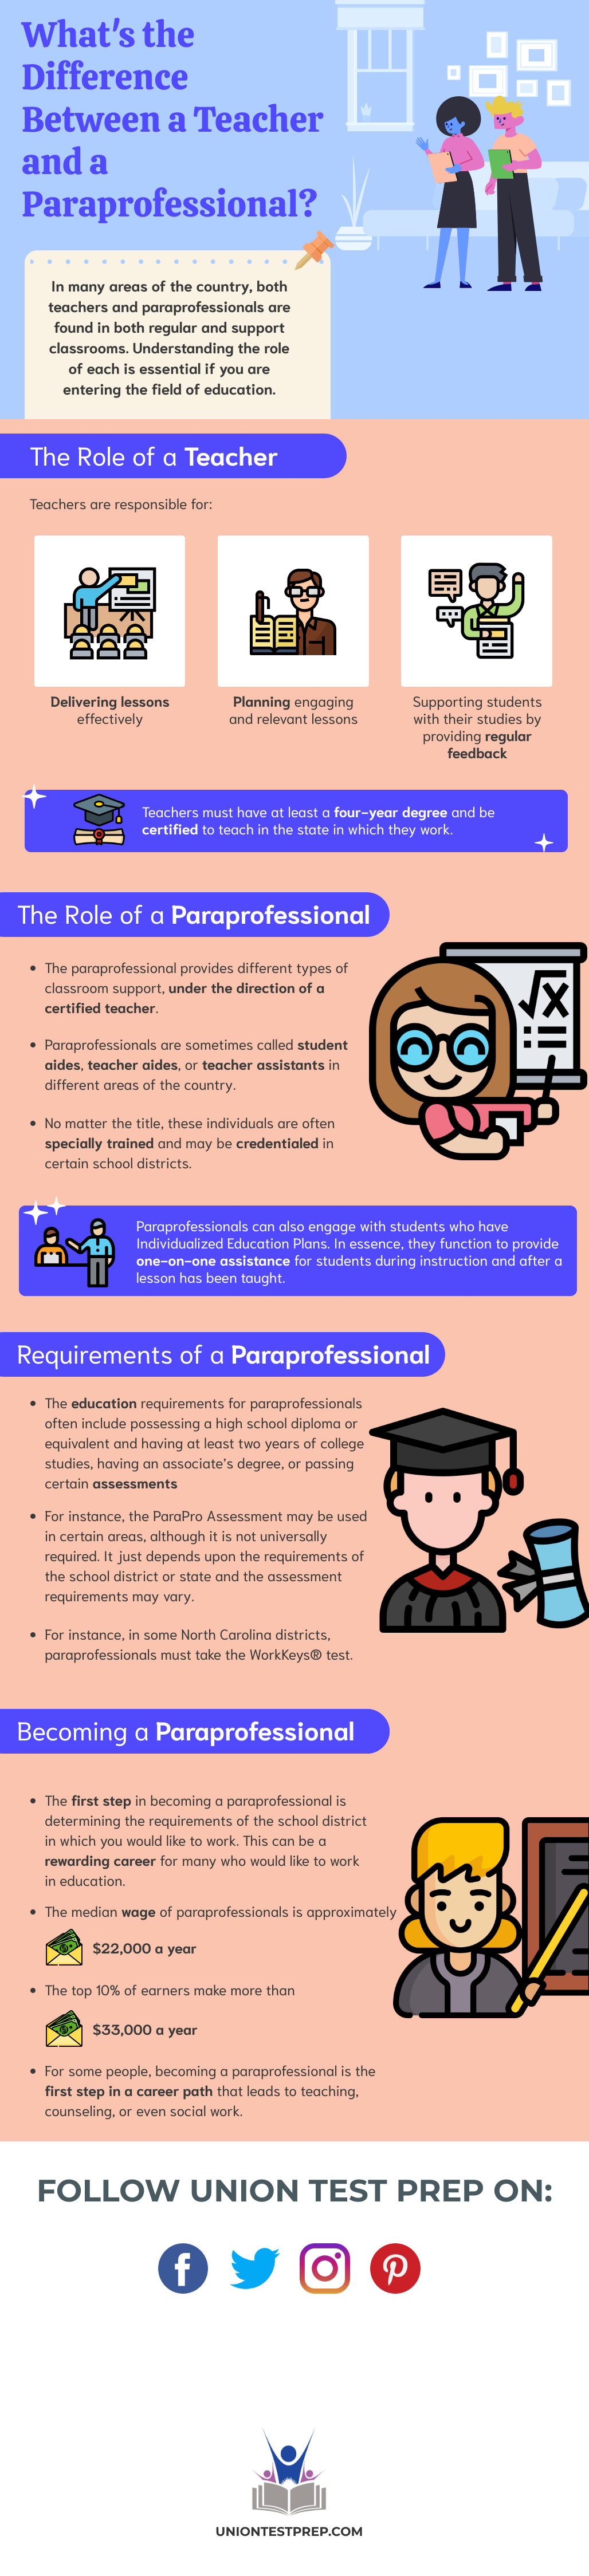 What's the Difference Between a Teacher and a ParaPro?